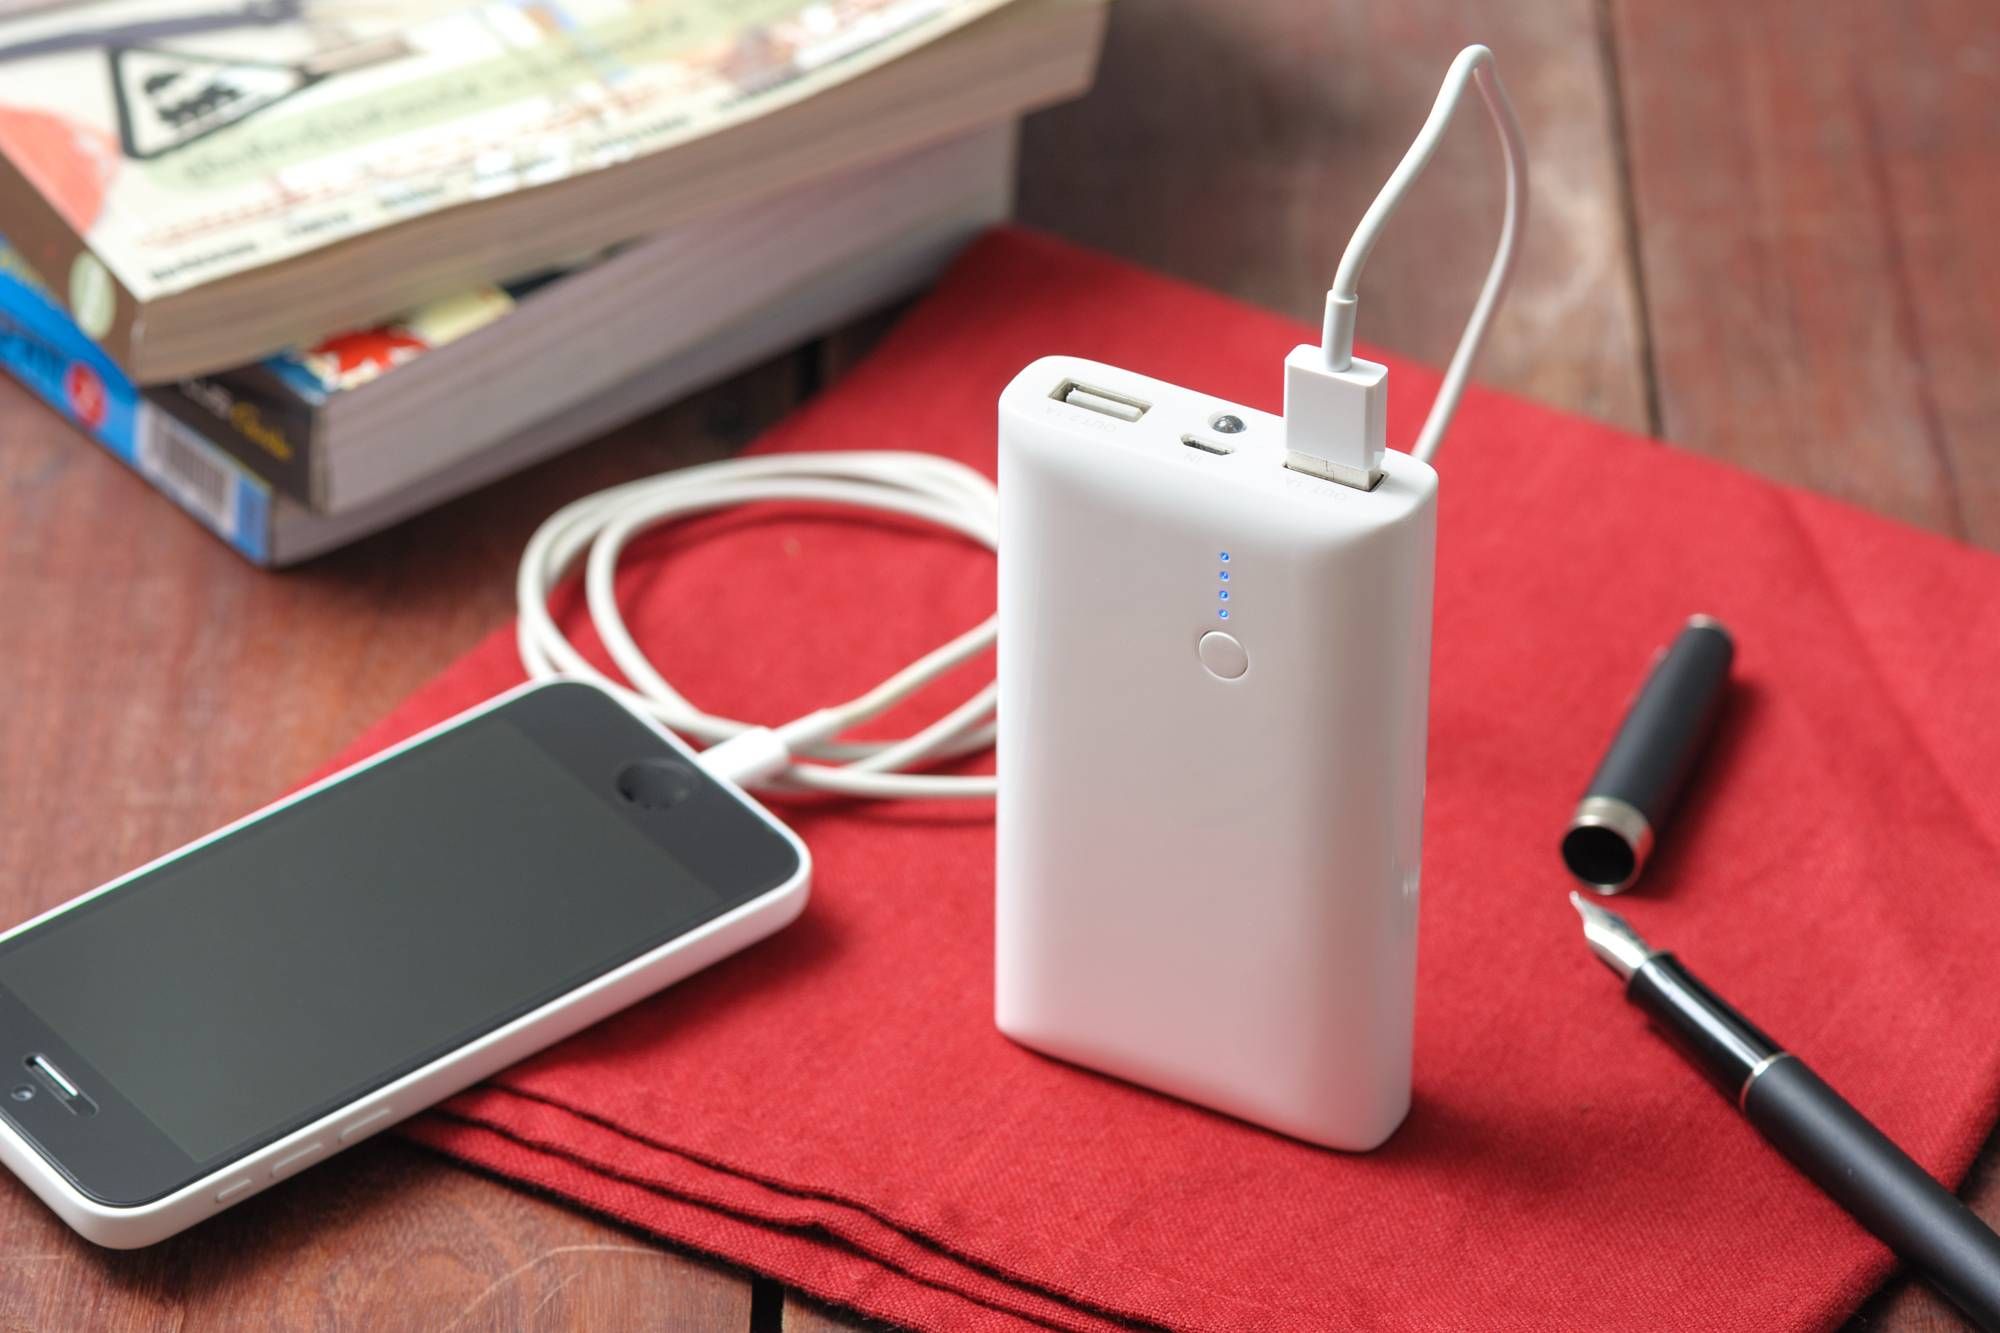 Onn power bank products reportedly provide less charge than advertised.